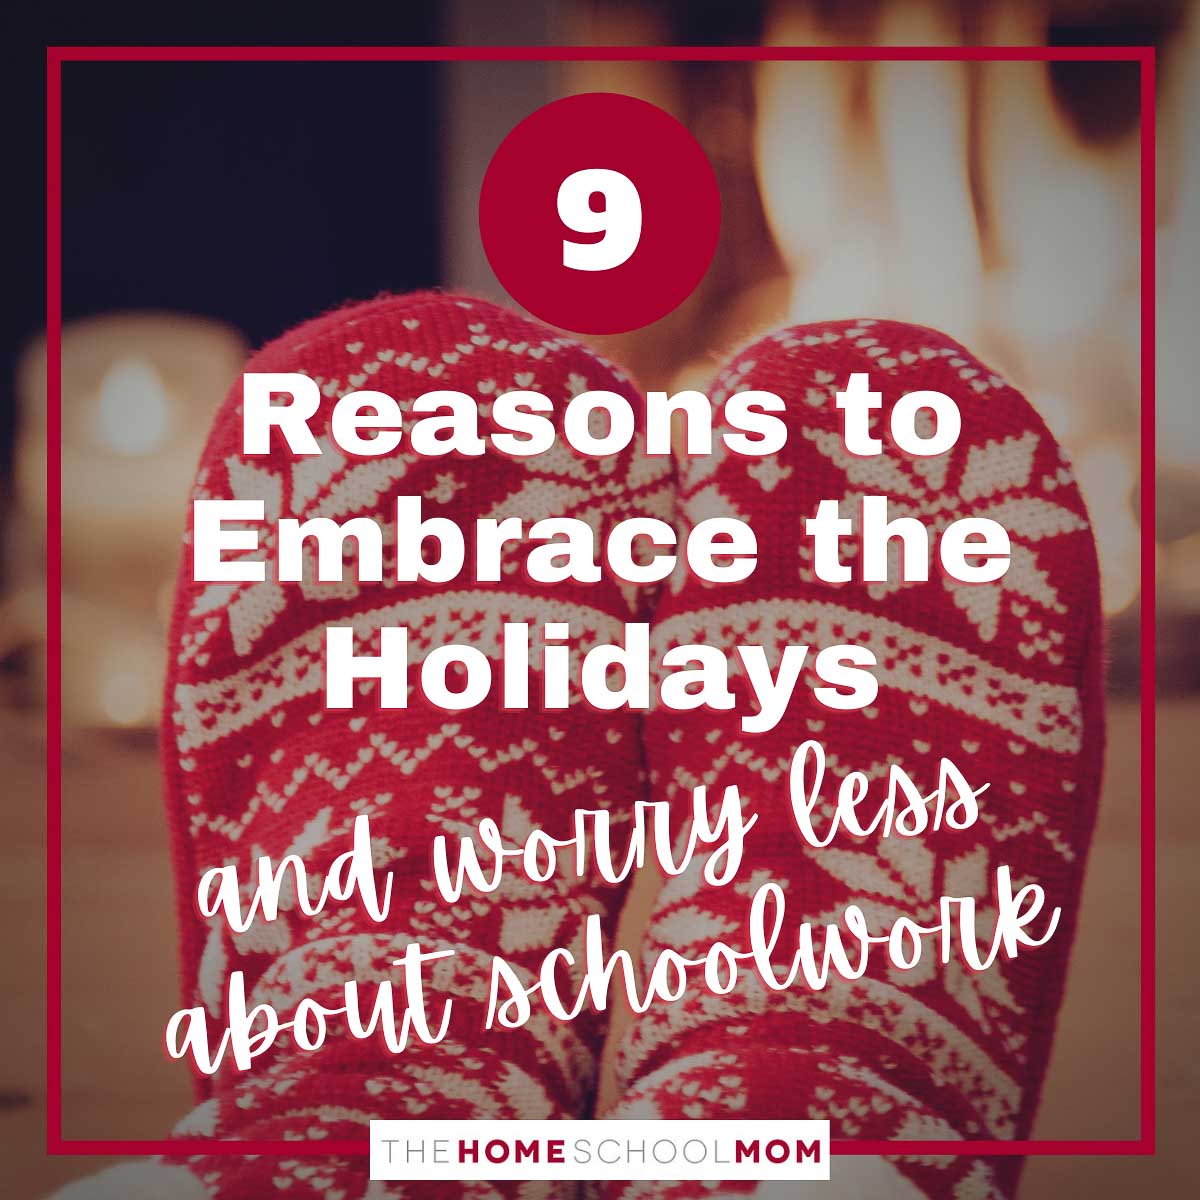 9 reasons to embrace the holidays and worry less about schoolwork - thehomeschoolmom.com